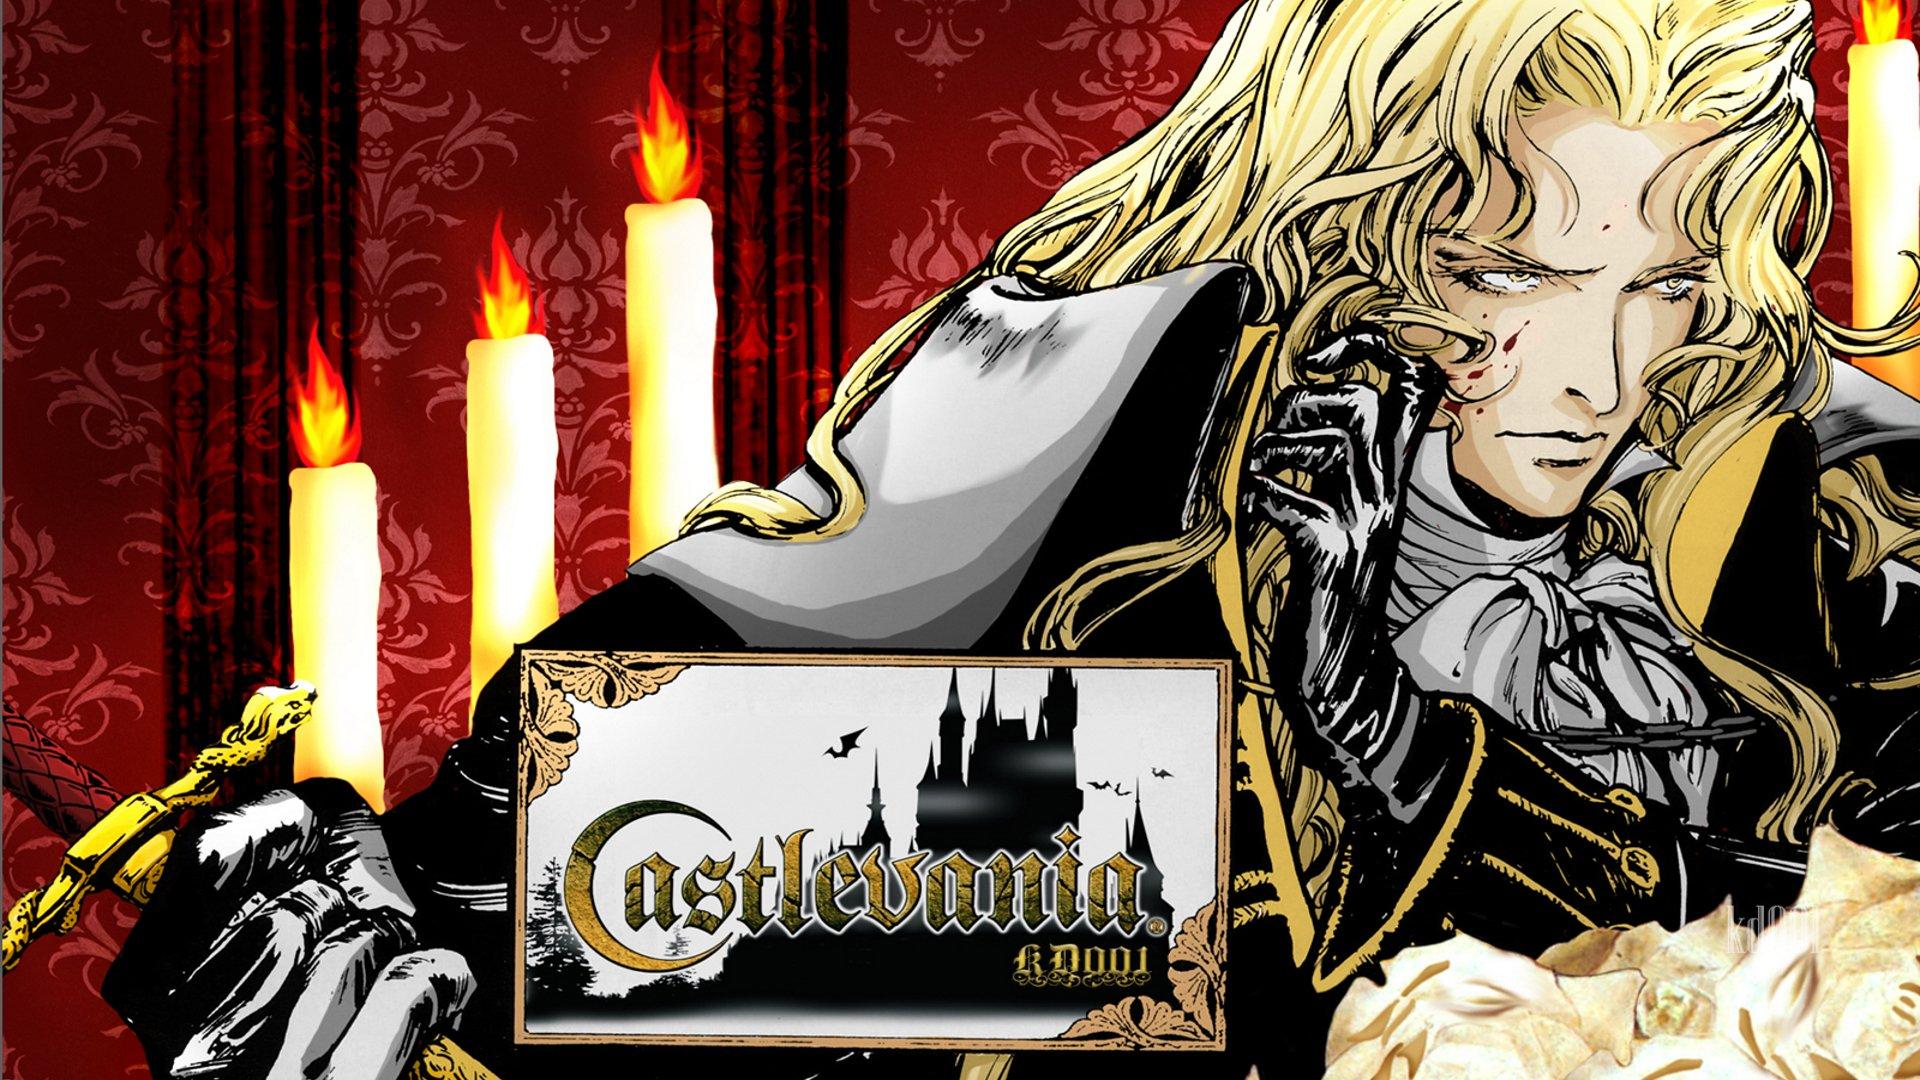 Castlevania: Symphony of the Night HD Wallpaper. Background Image